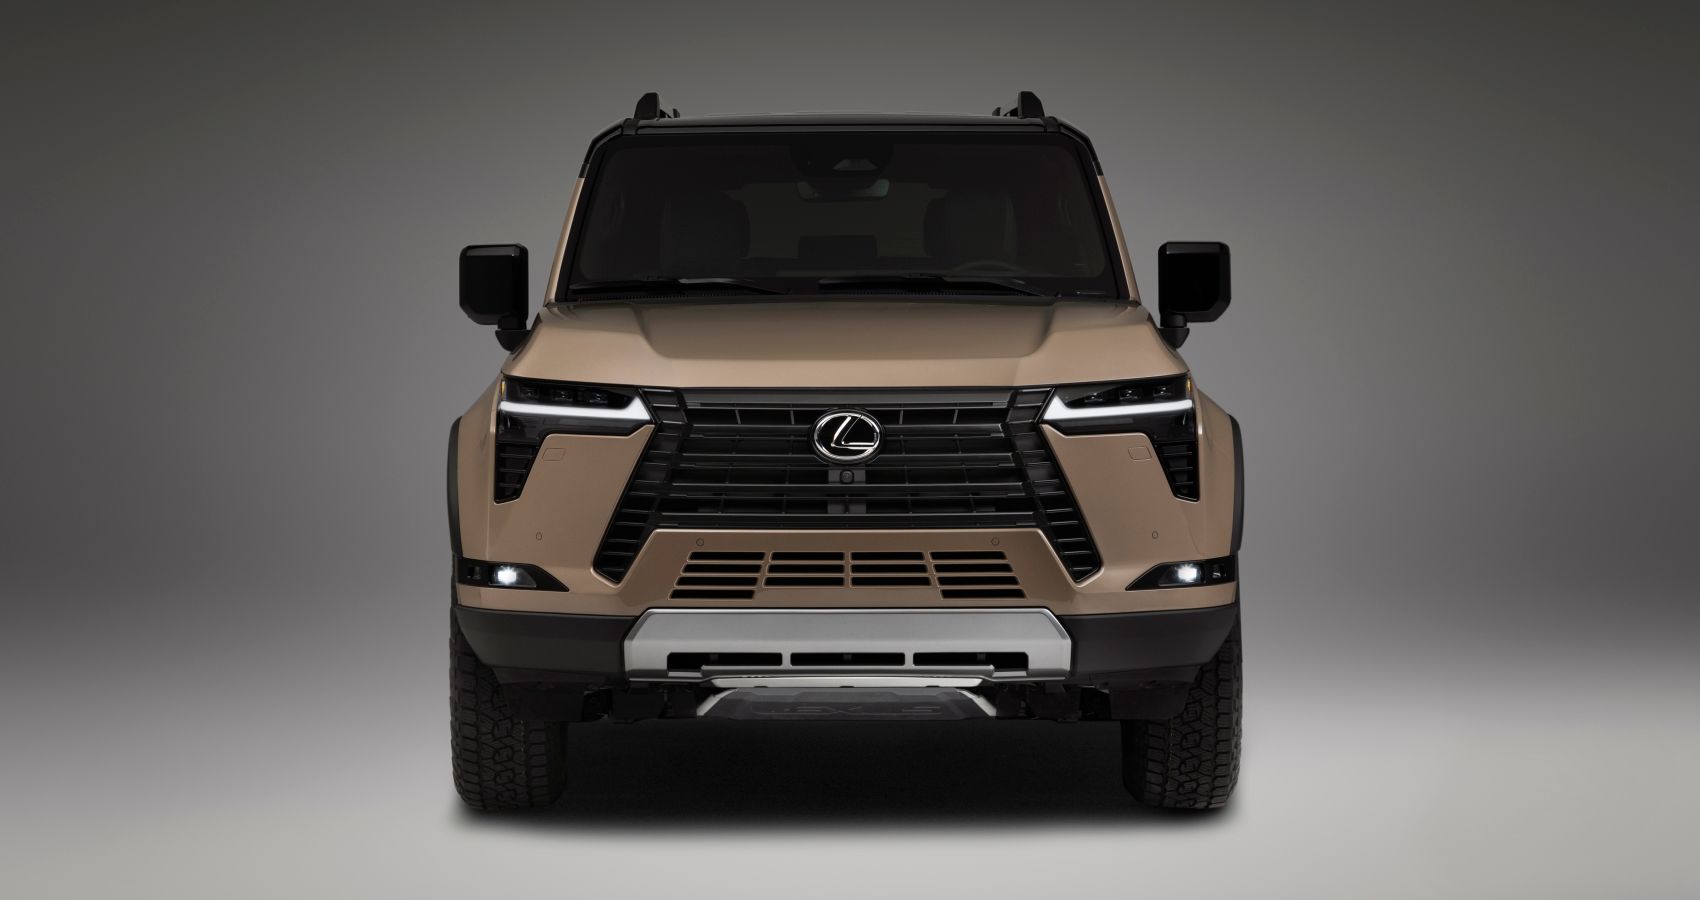 10 Expected Features Of The 2024 Lexus GX OffRoad SUV